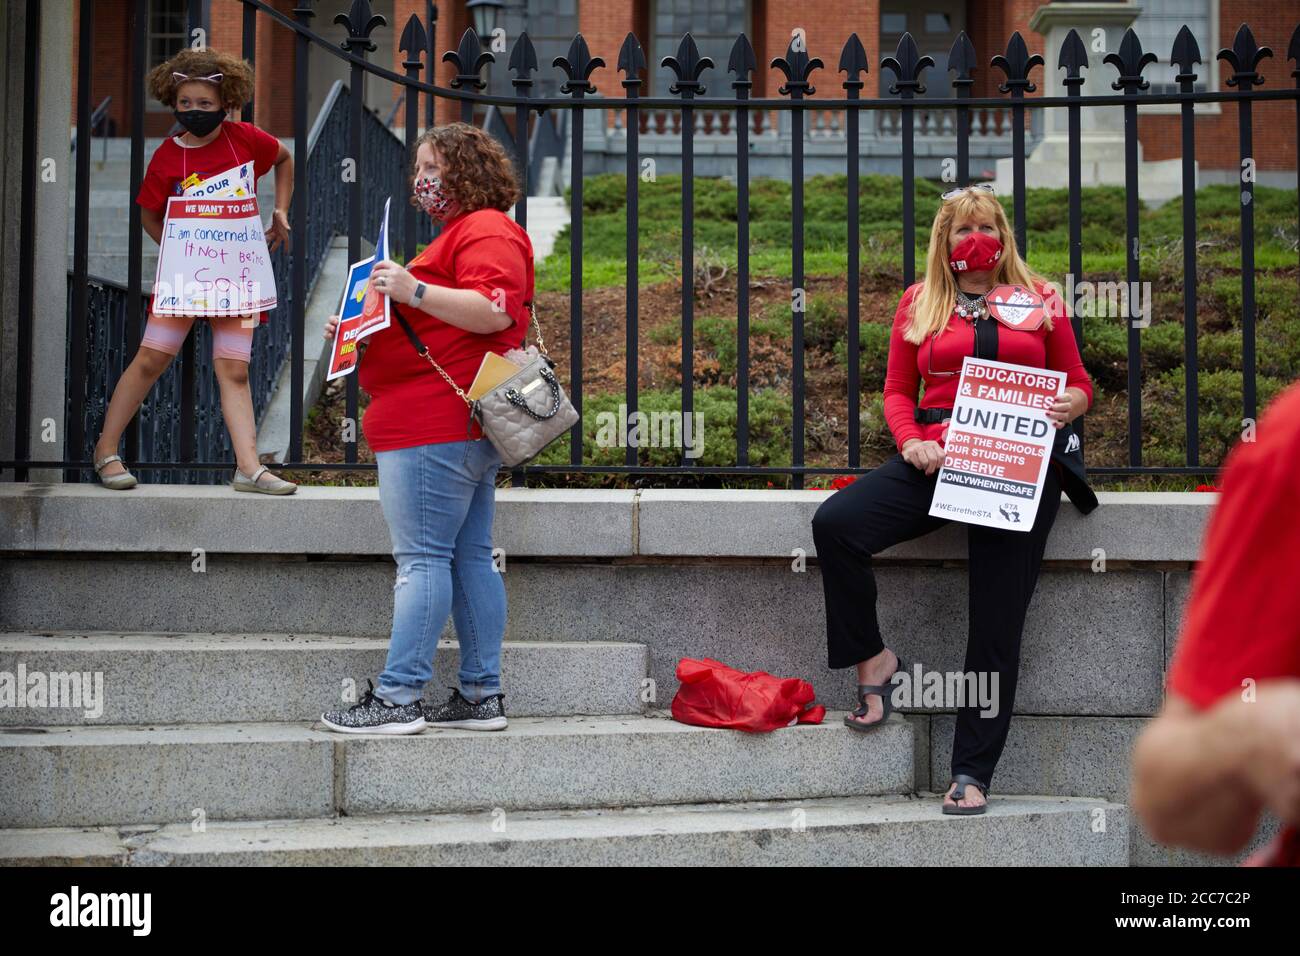 Boston, Massachusetts, U.S.A. 19th Aug, 2020. Massachuetts teachers protest the state's reopening of schools in front of the State House in Boston, MA on August 19, 2020. More than 100 teachers gathered in front of the State House to protest in person learning, and demand the 2020-21 school year be full remote learning due to COVID-19, Corona Virus. Credit: Allison Dinner/ZUMA Wire/Alamy Live News Stock Photo